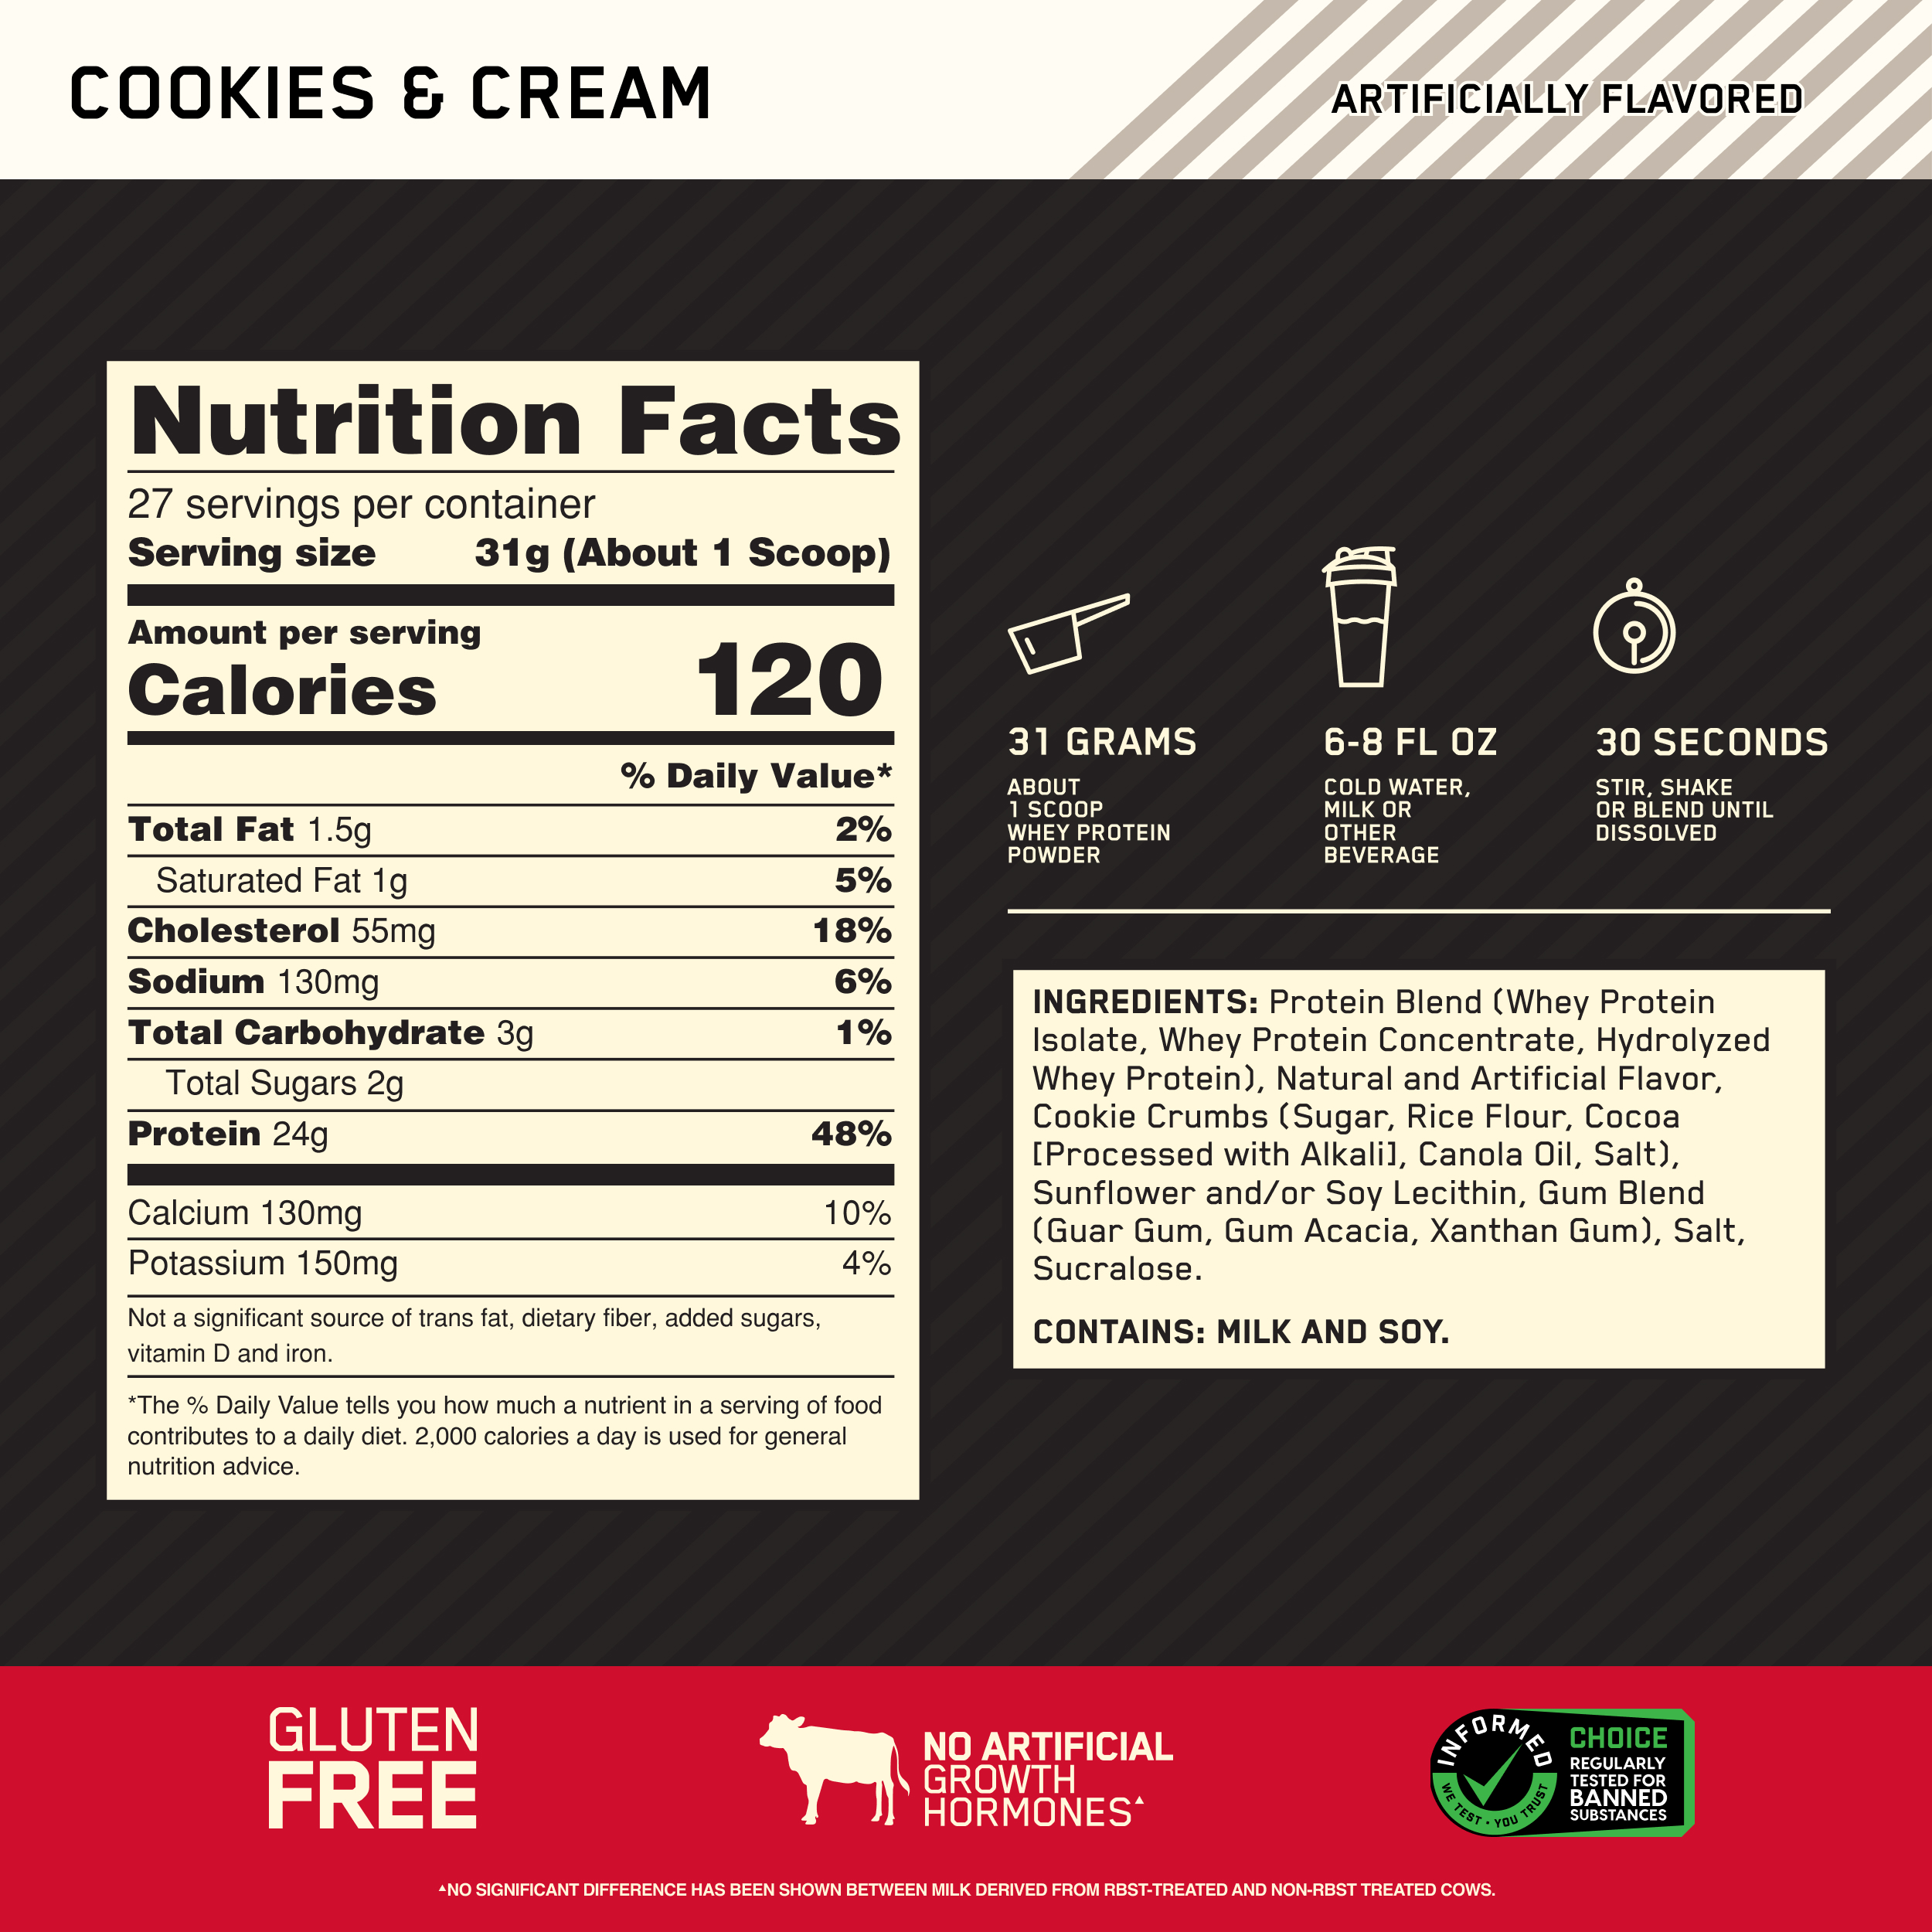 Optimum Nutrition, Gold Standard 100% Whey Protein Powder, 24 g Protein, Cookies & Cream, 1.85 lb, 27 Servings - image 6 of 11